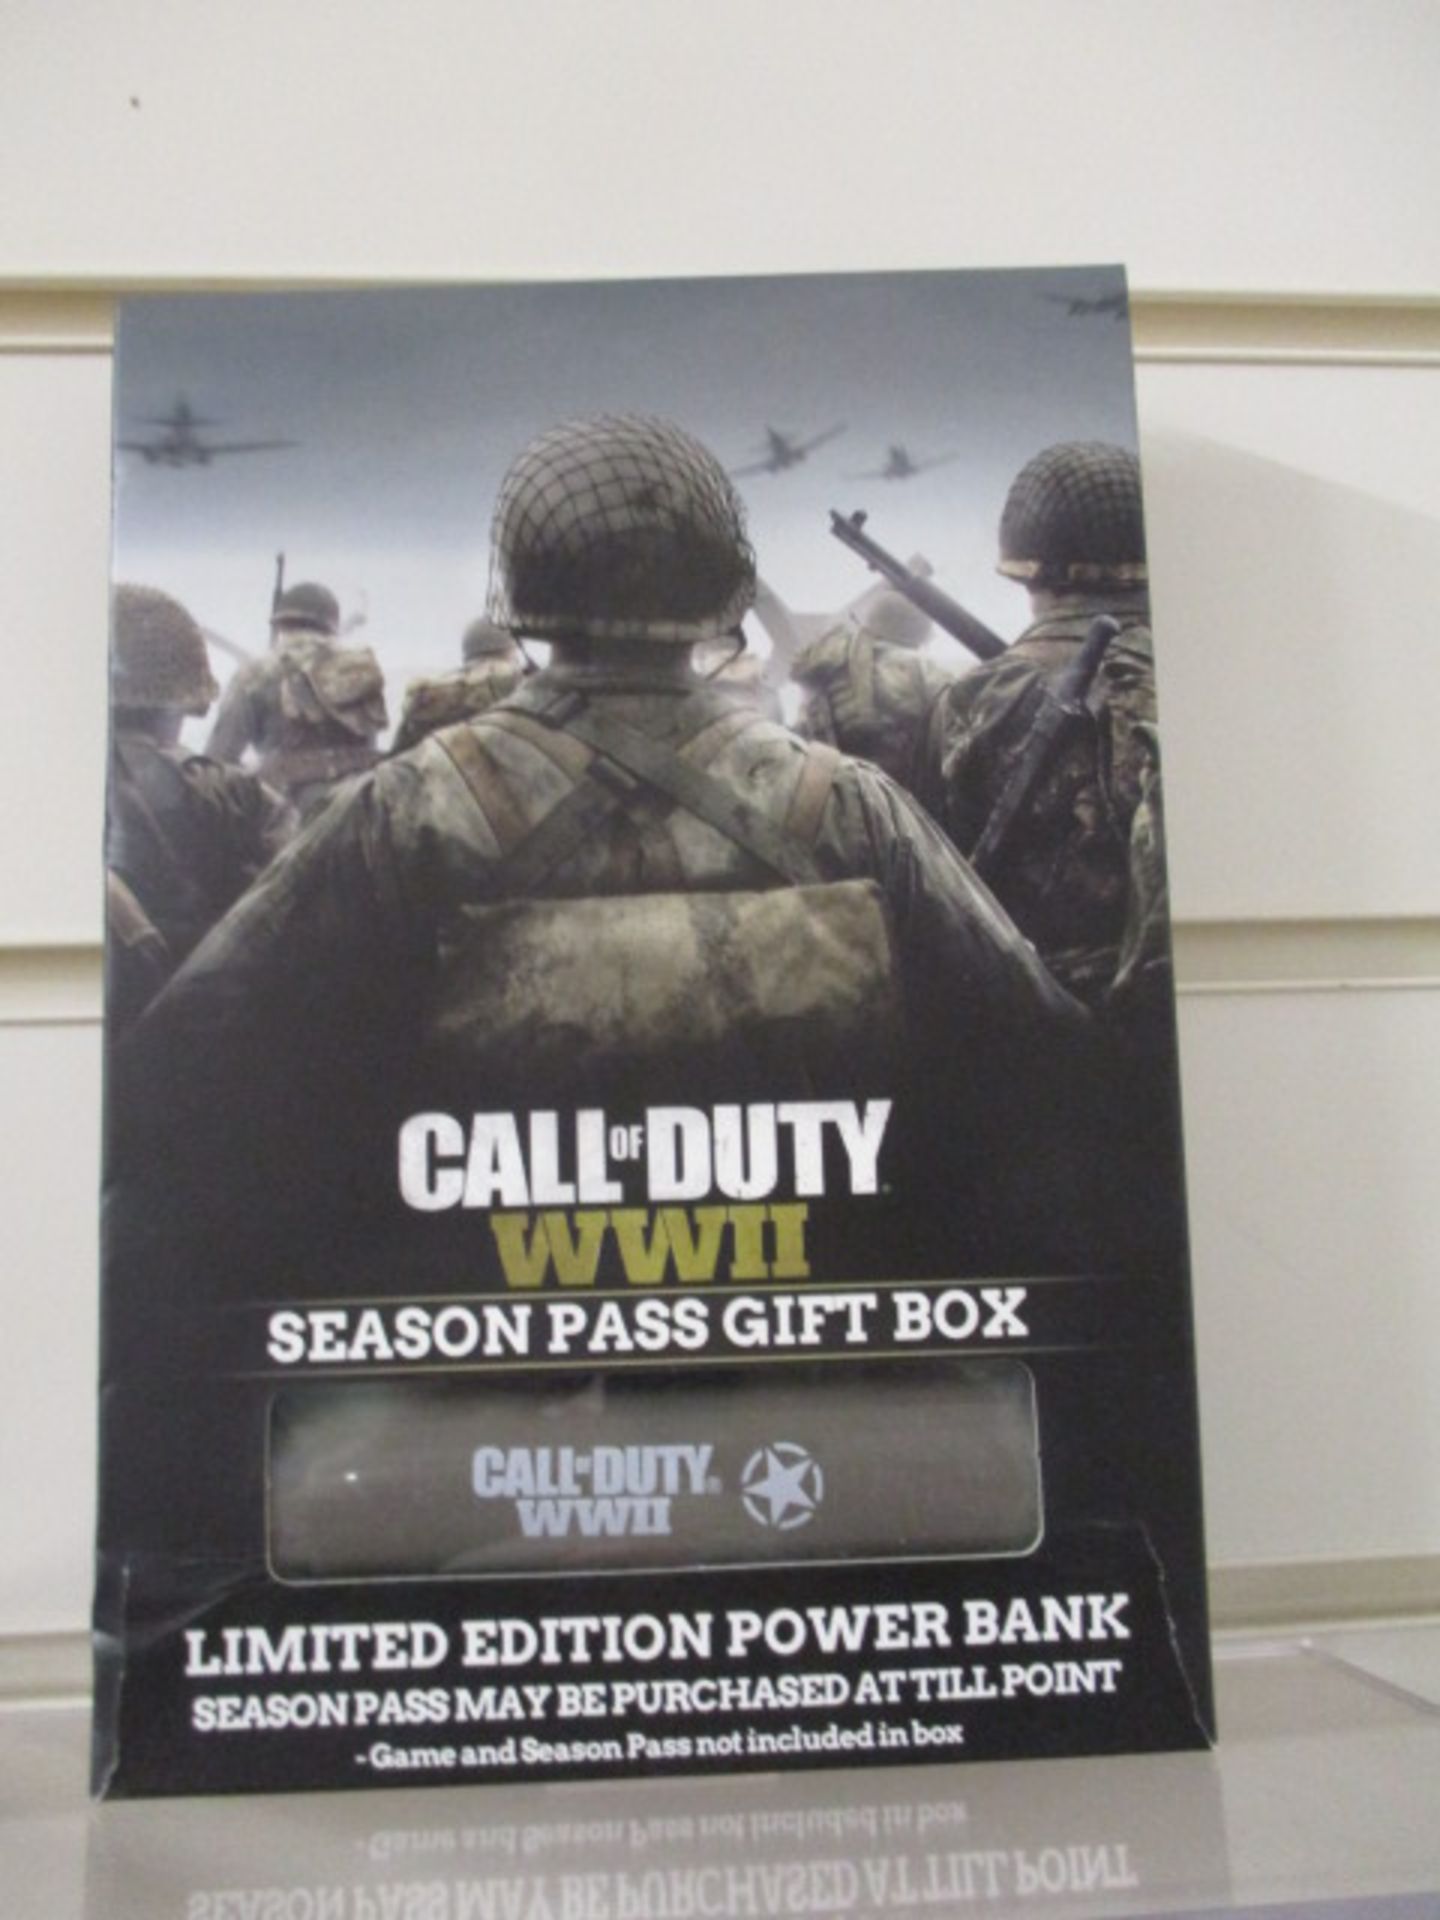 100 x Call of Duty Power Banks with USB Lead Included | POWER BANK ONLY